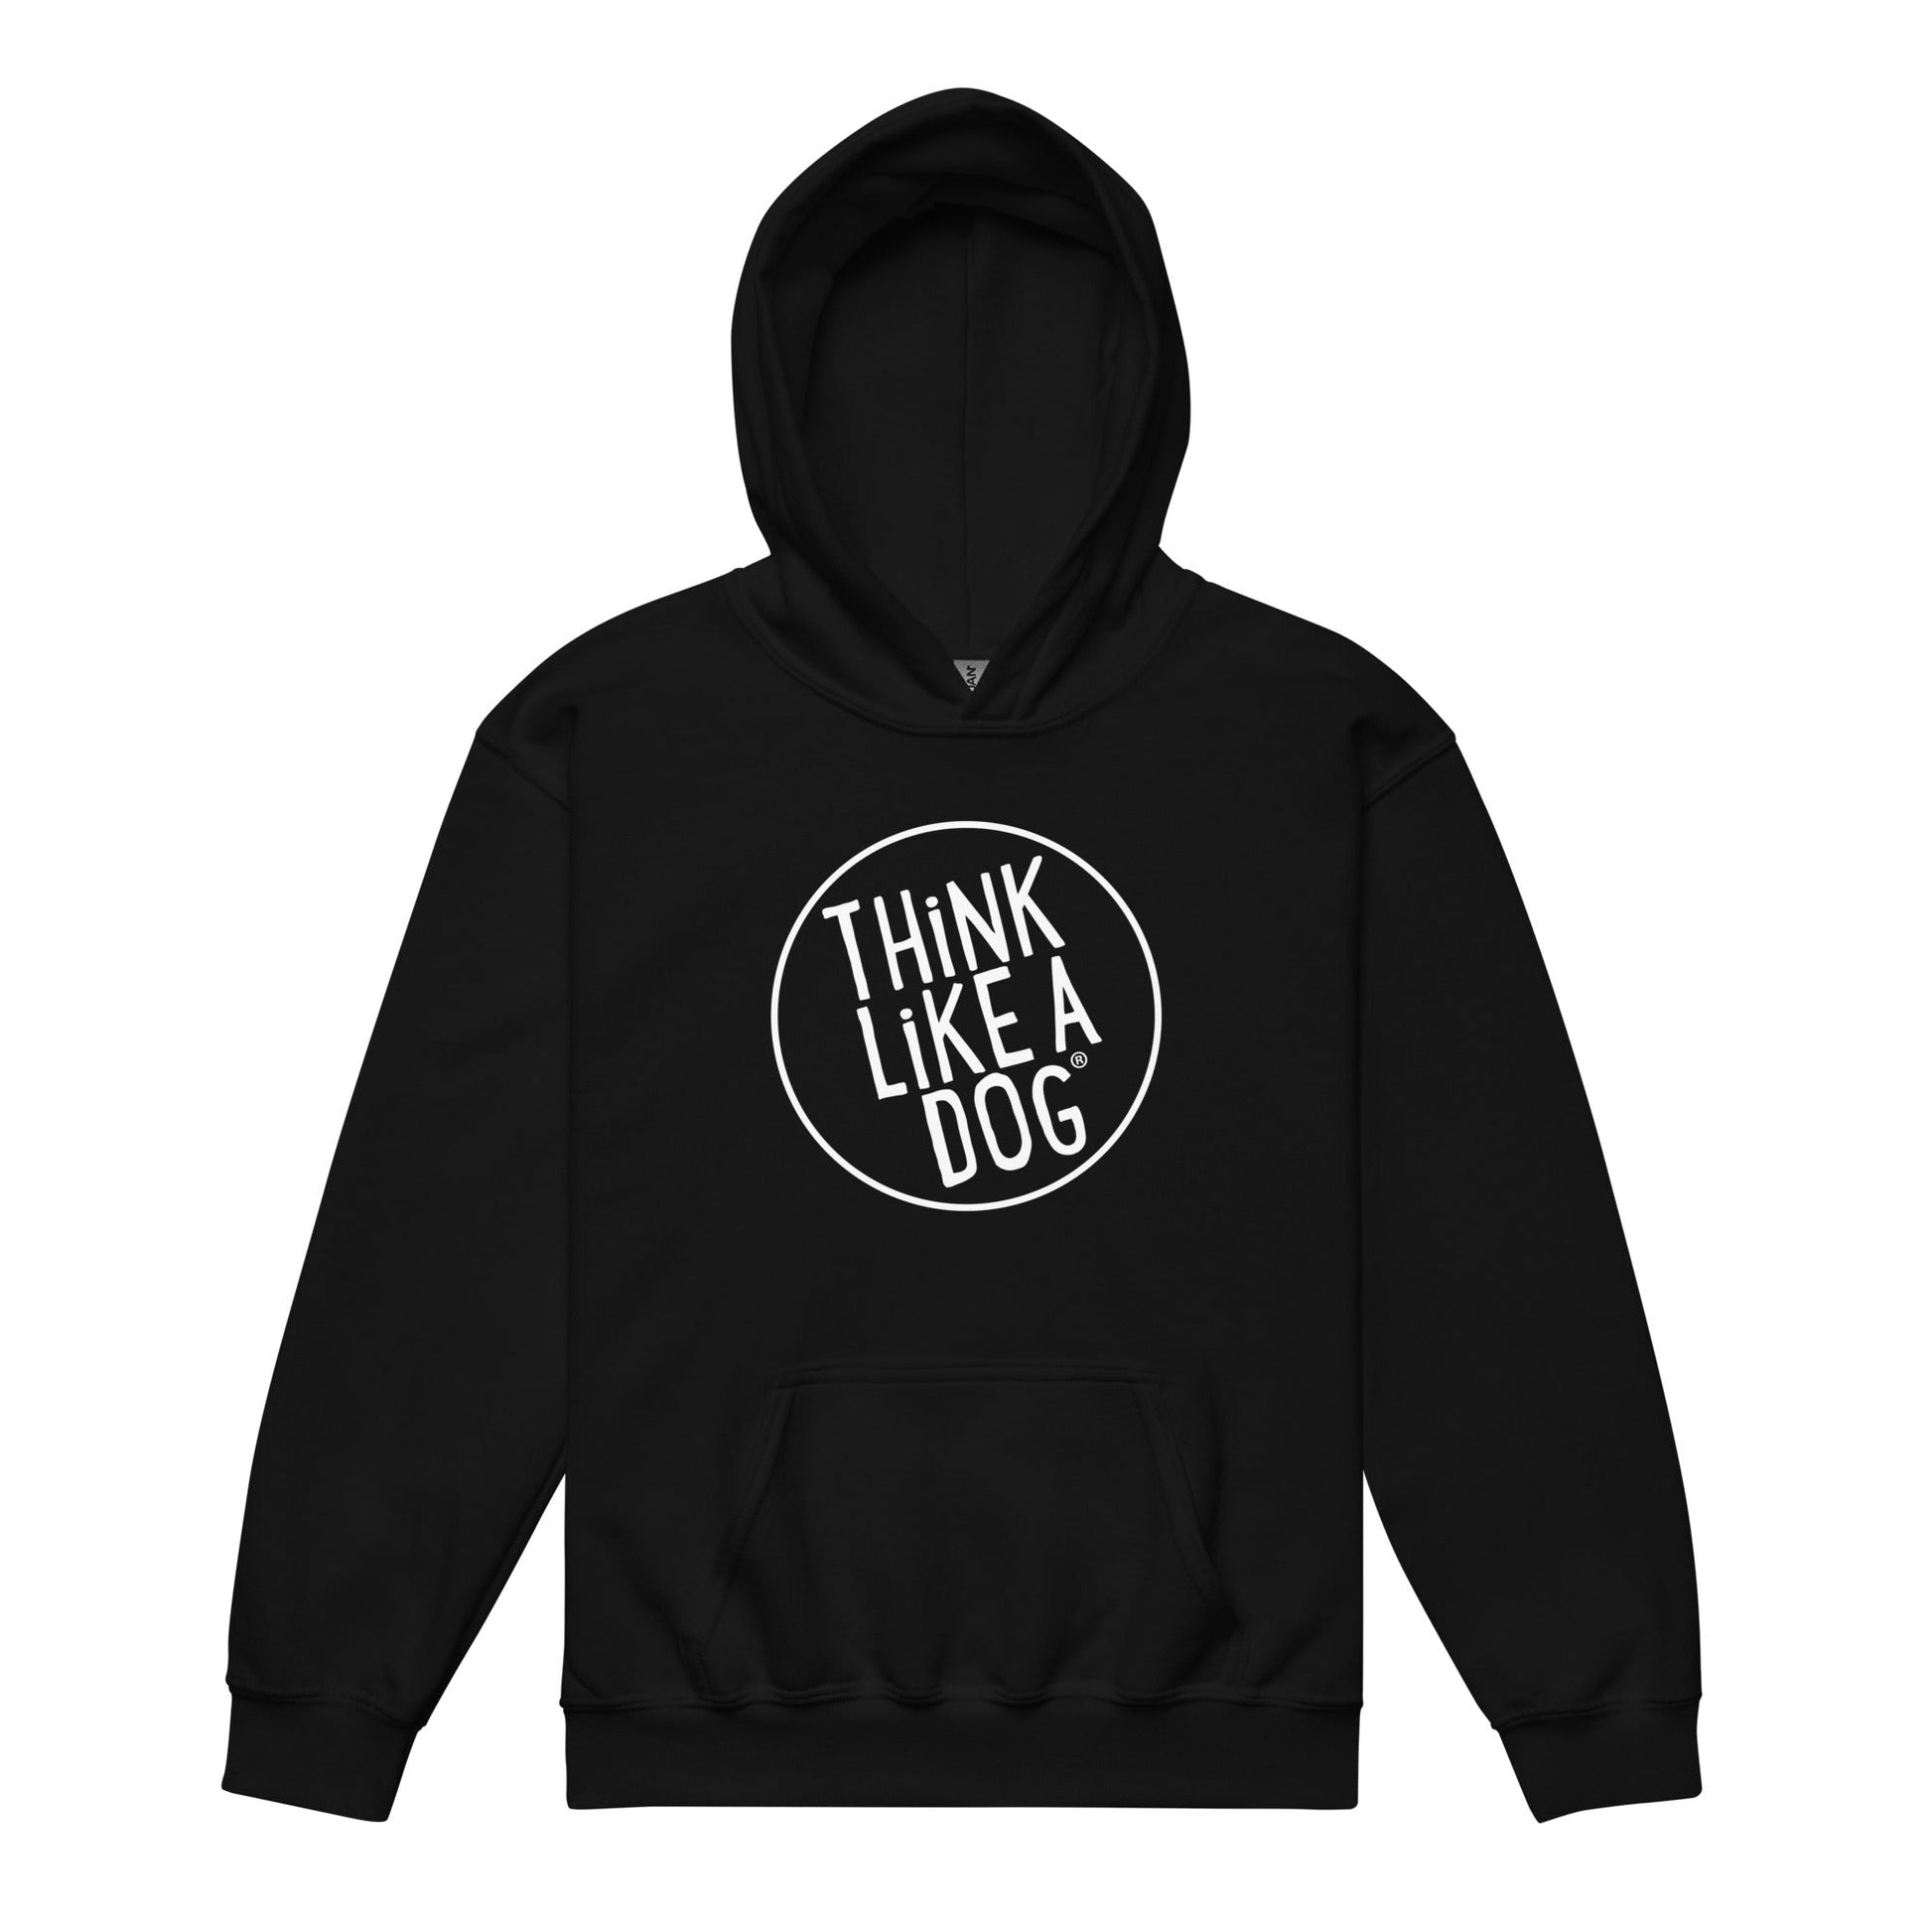 Kids Heavy Blend Hoodie With THiNK LiKE A DOG® White Logo, black, with "think like a dog" text in a breathable cotton white circle design on the front.